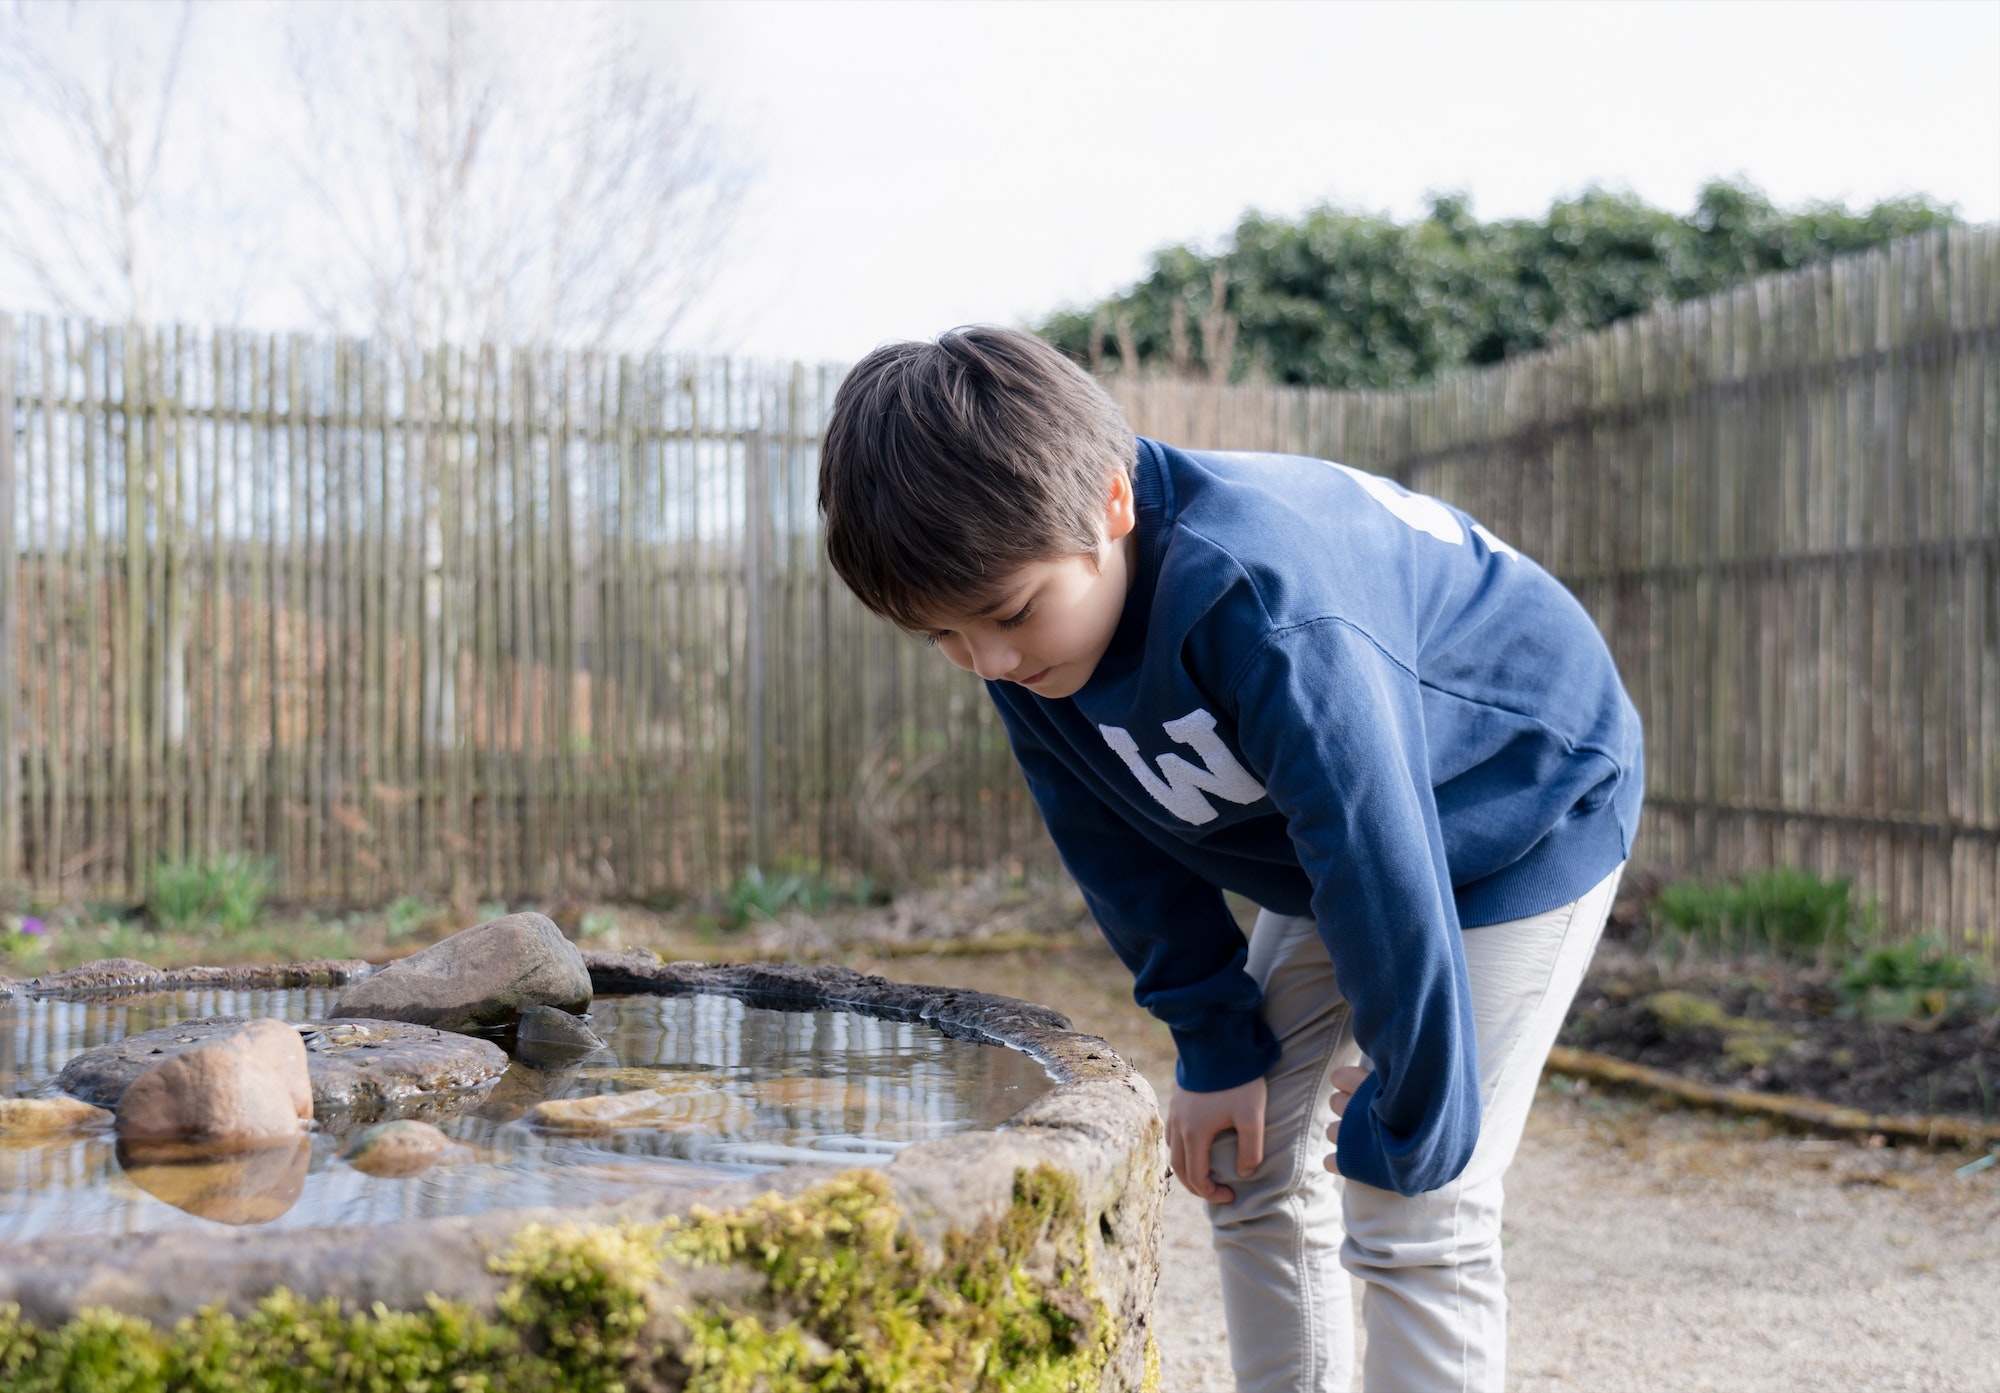 Kid looking at pond wildlife in garden, Boy watching creatures in fish pond in sunny day Spring,